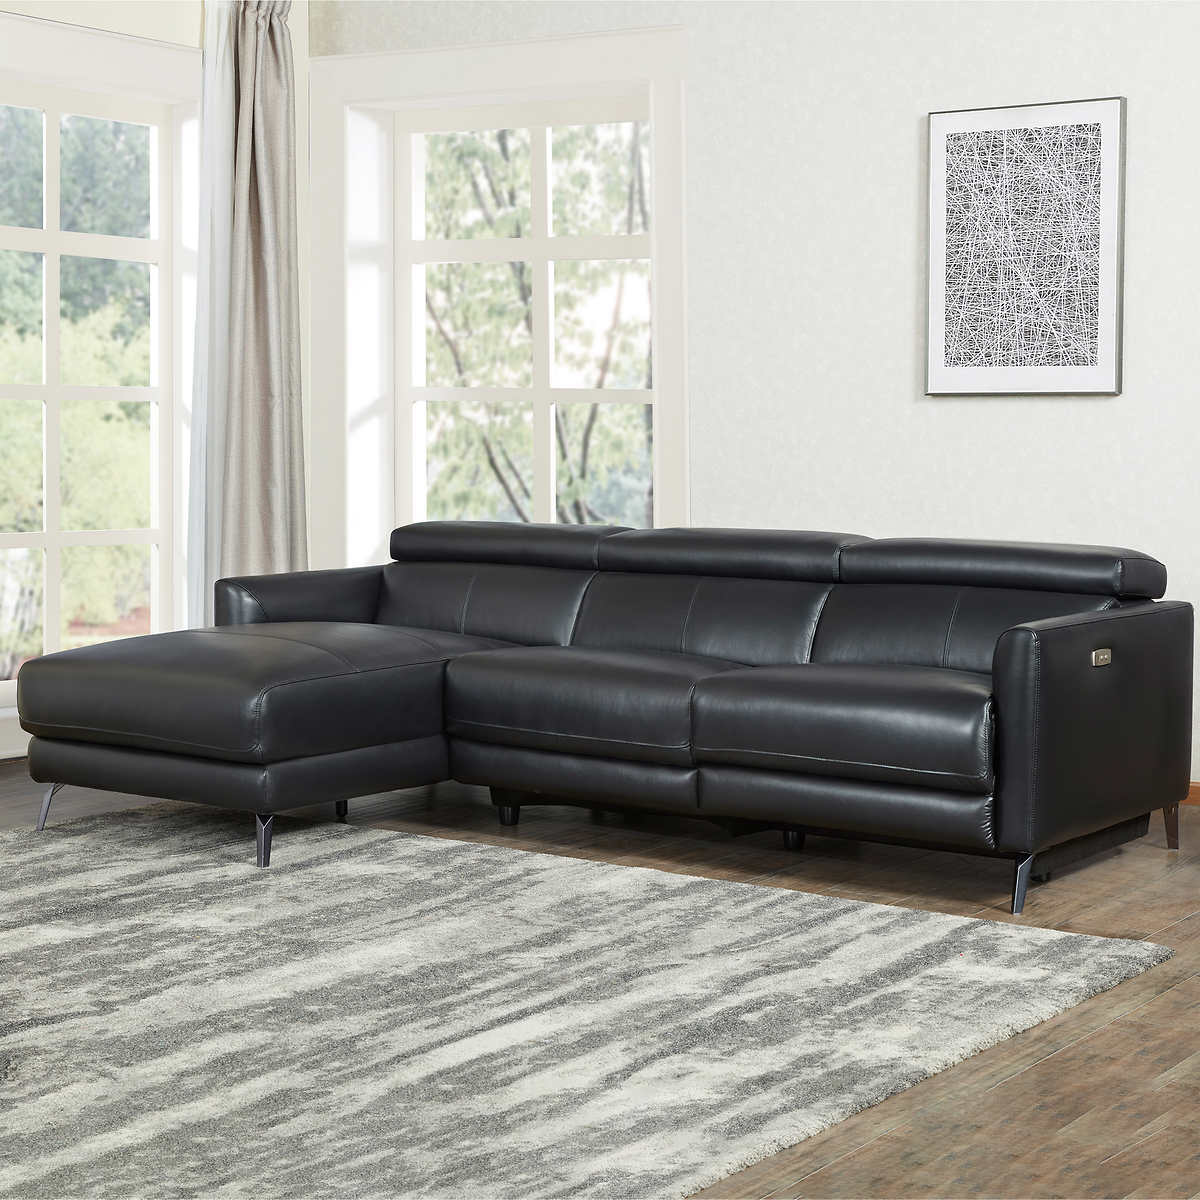 Hoffman Leather Power Reclining, Black Leather Sectional With Recliners